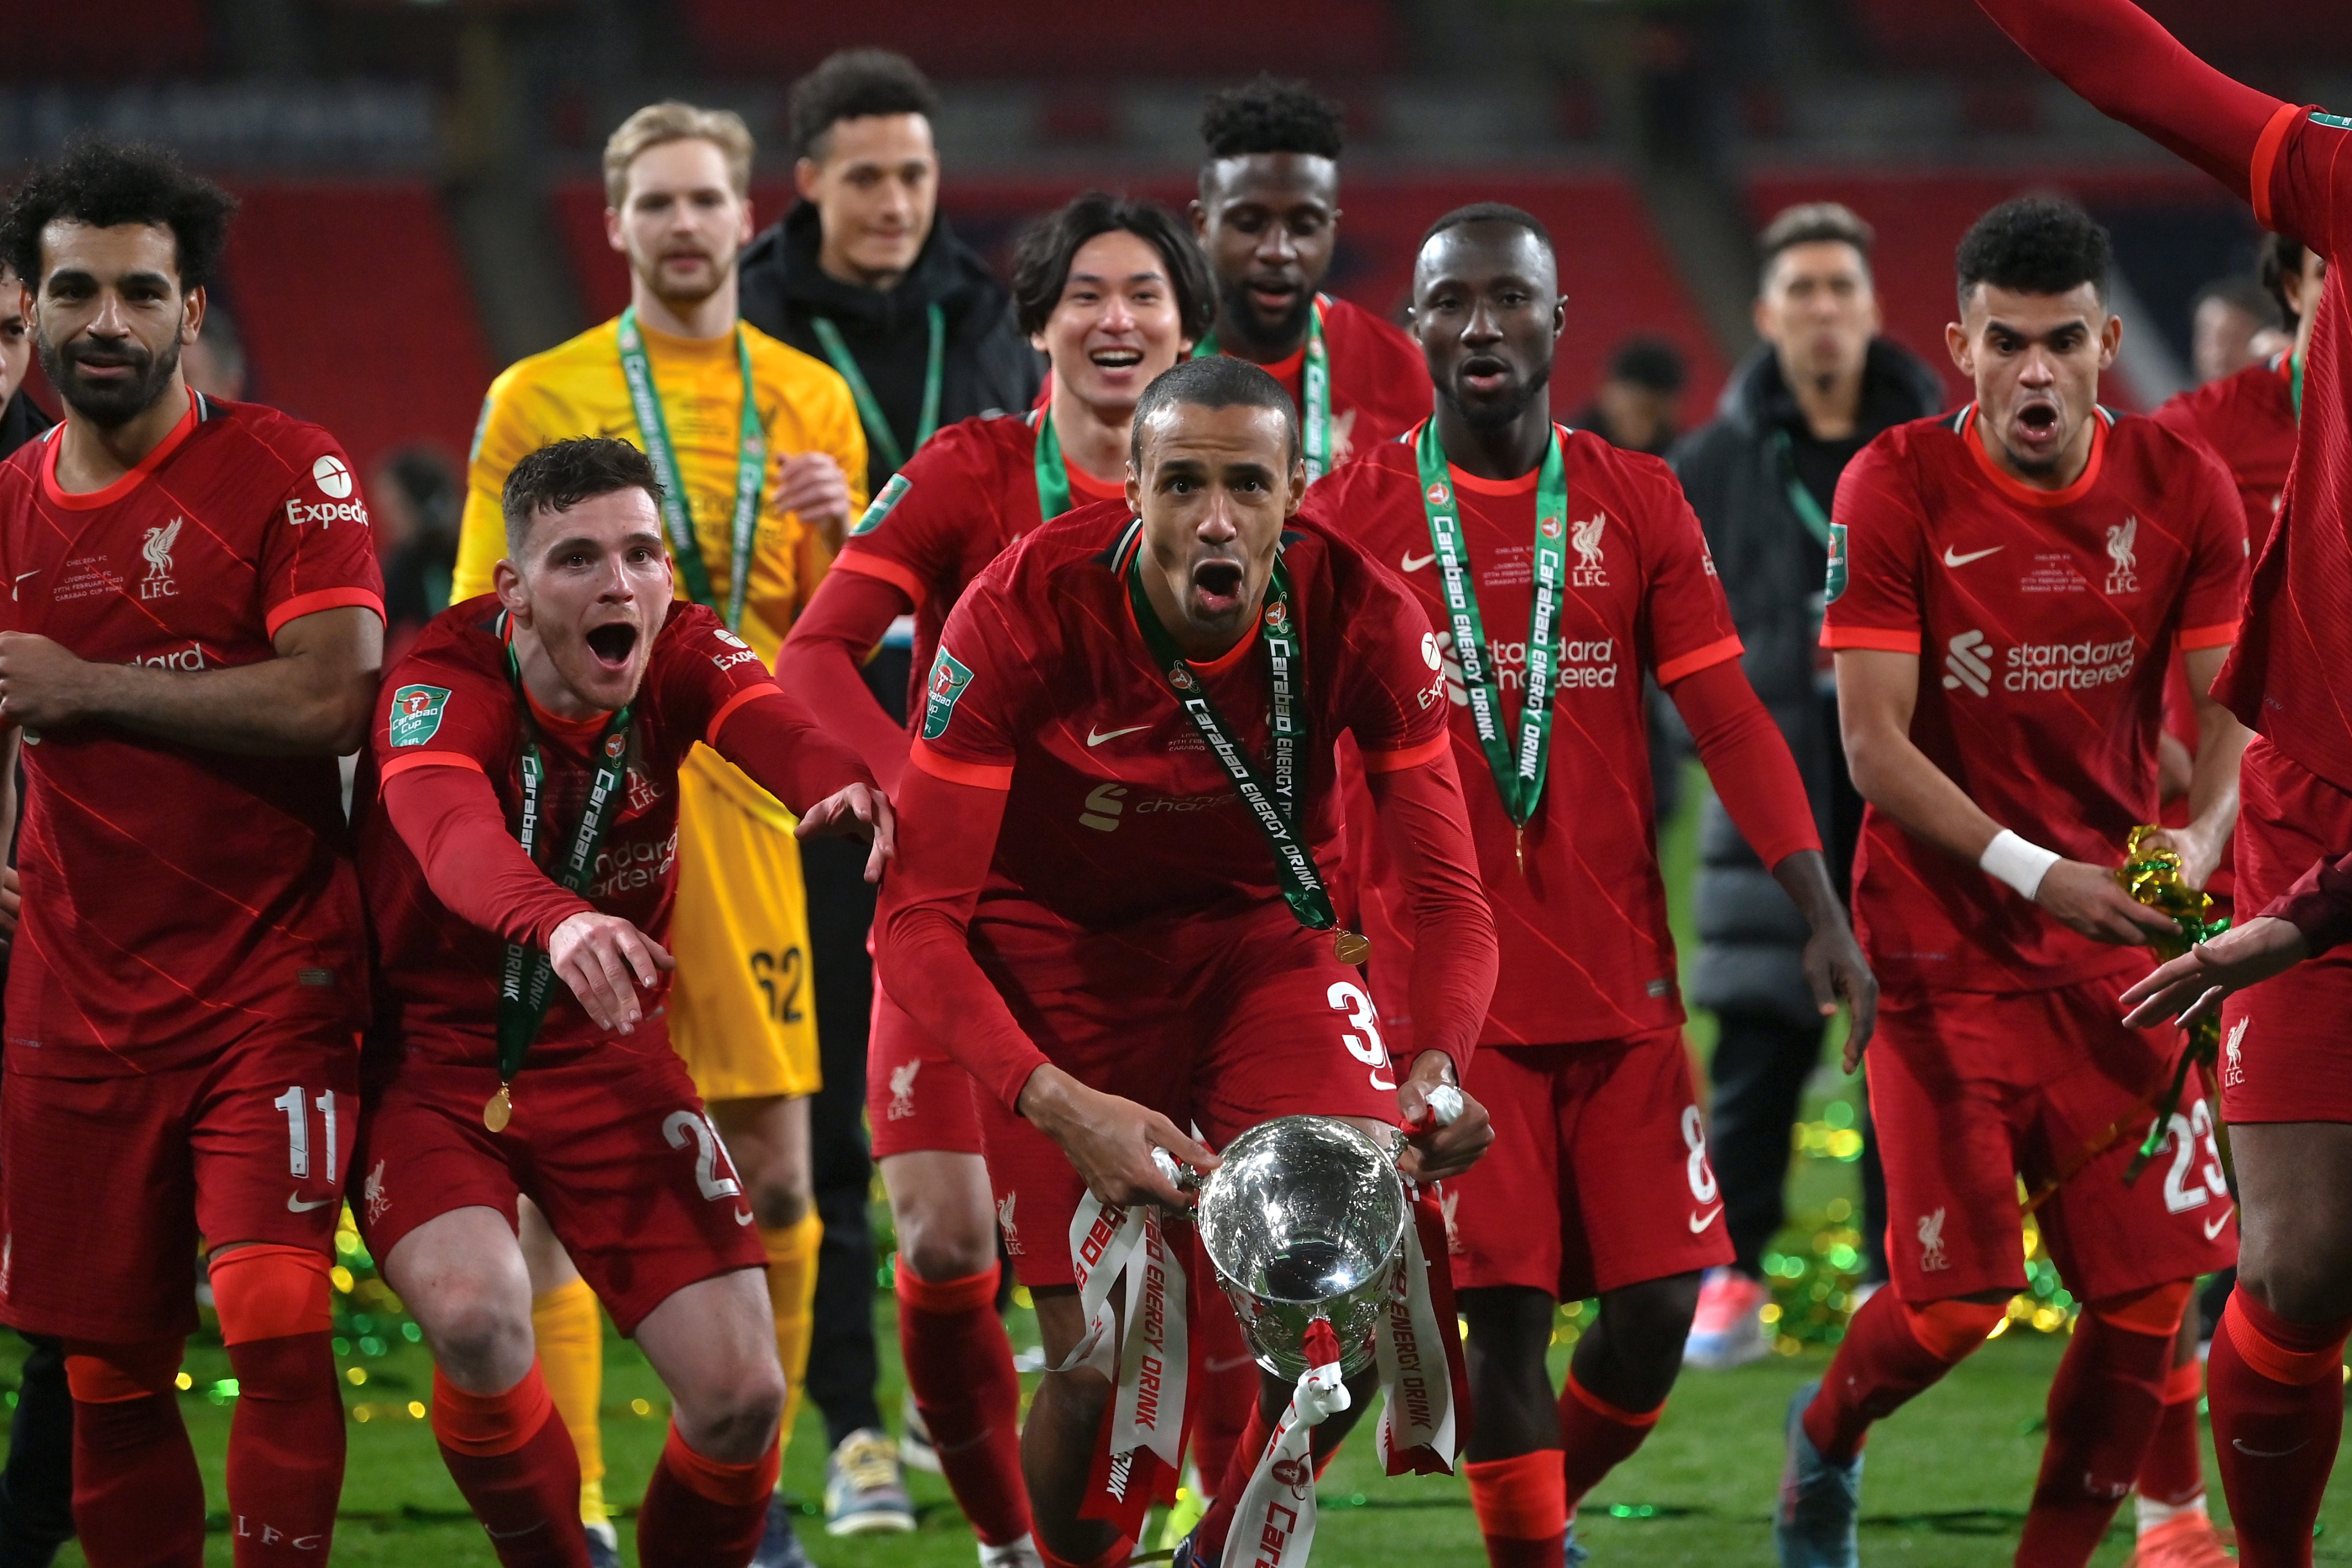 Liverpool wins the Carabao Cup for the record ninth time at Wembley Stadium